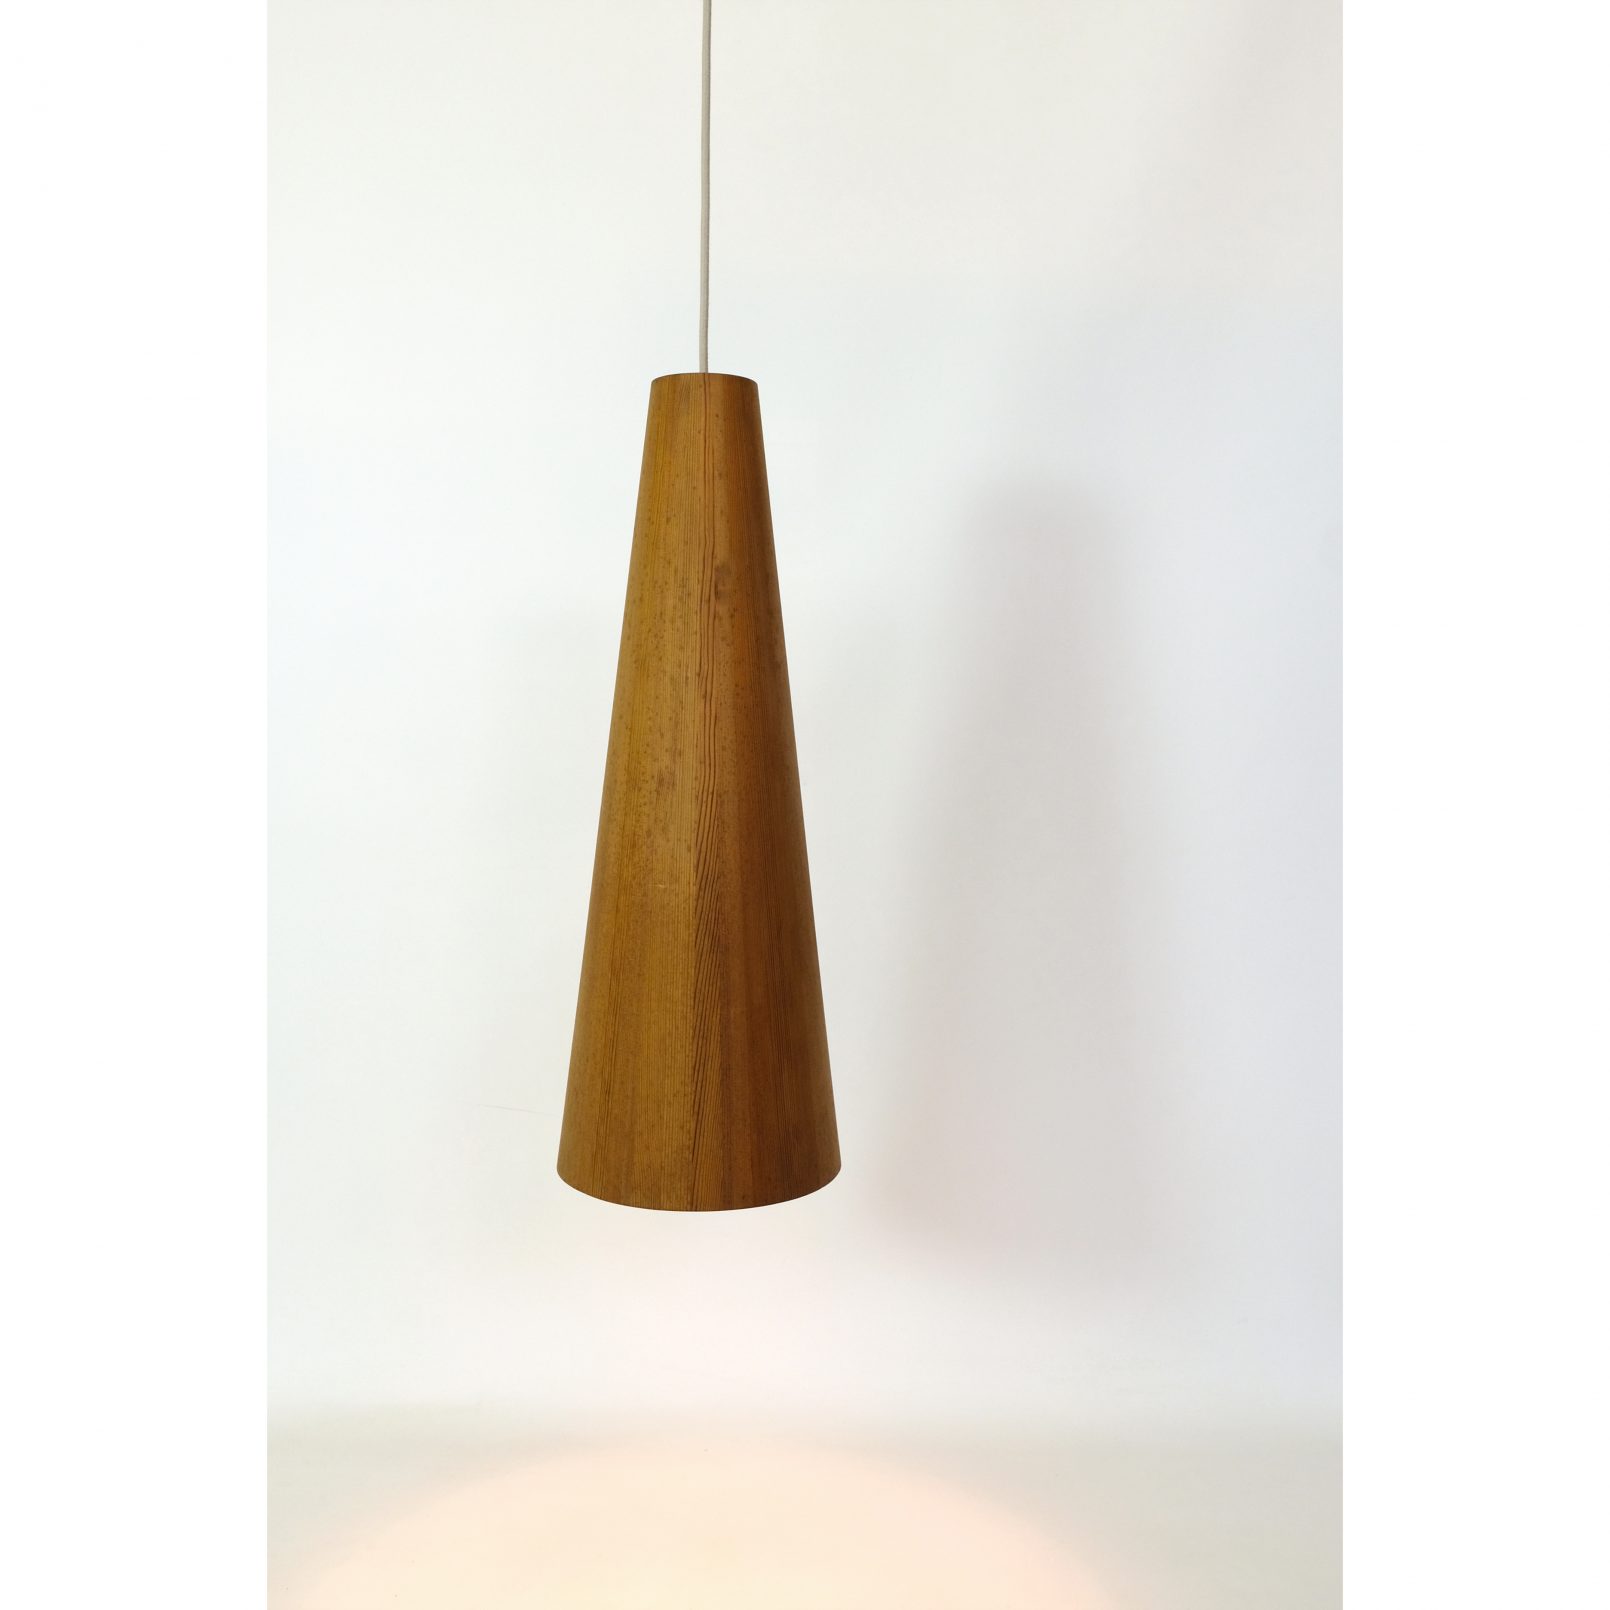 Jorgen Wolf, large pendant made of pinewood, 1960s.